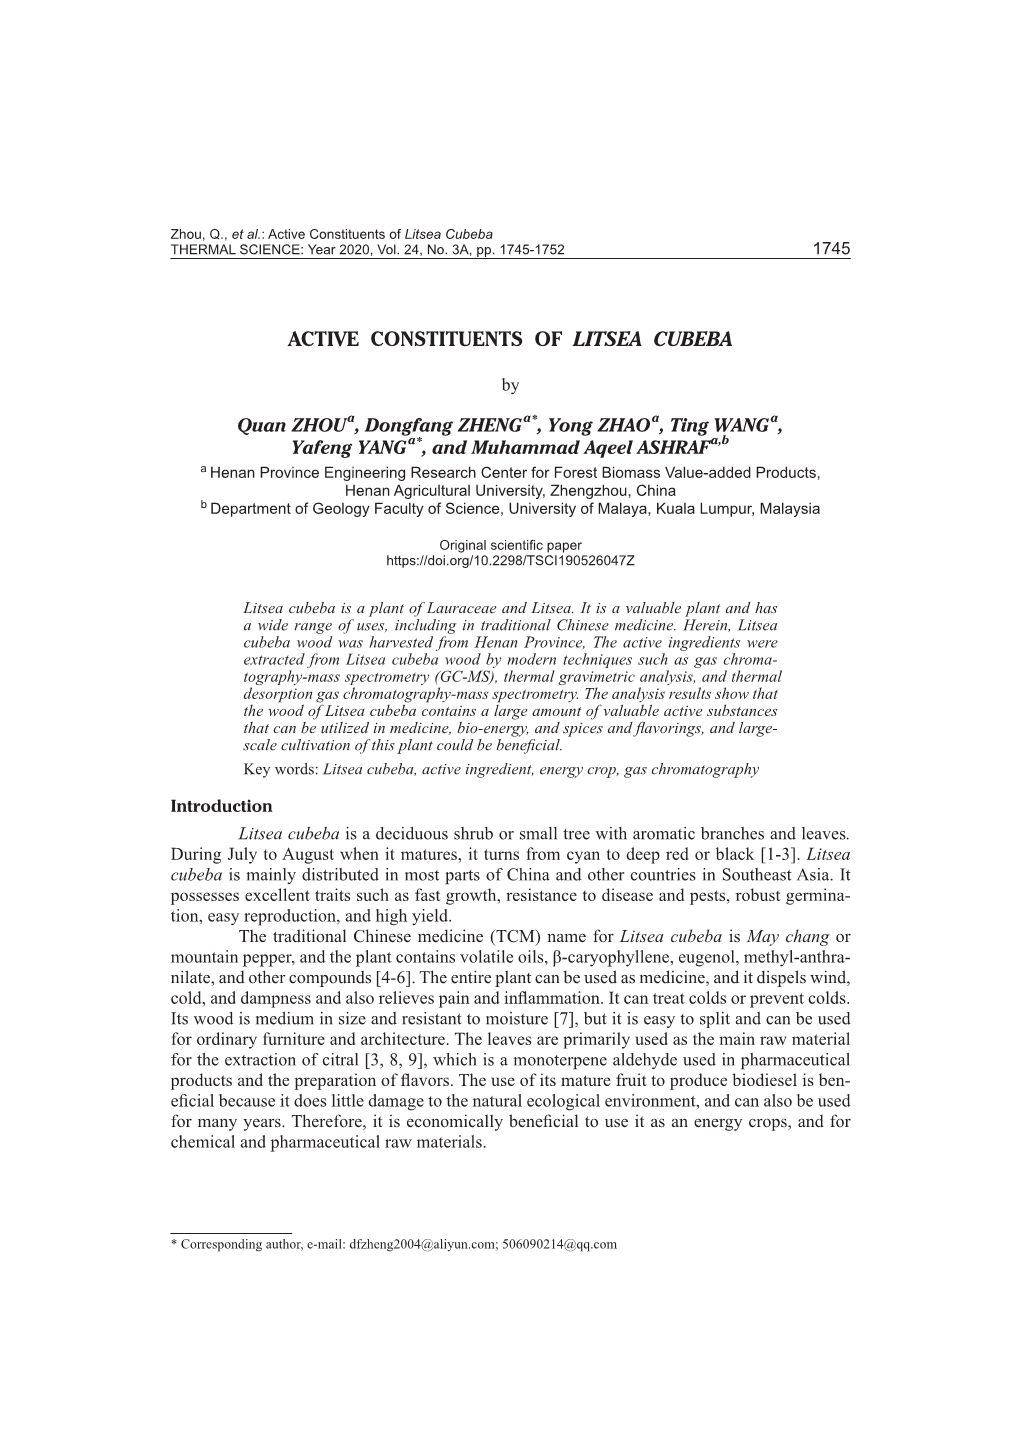 Active Constituents of Litsea Cubeba THERMAL SCIENCE: Year 2020, Vol